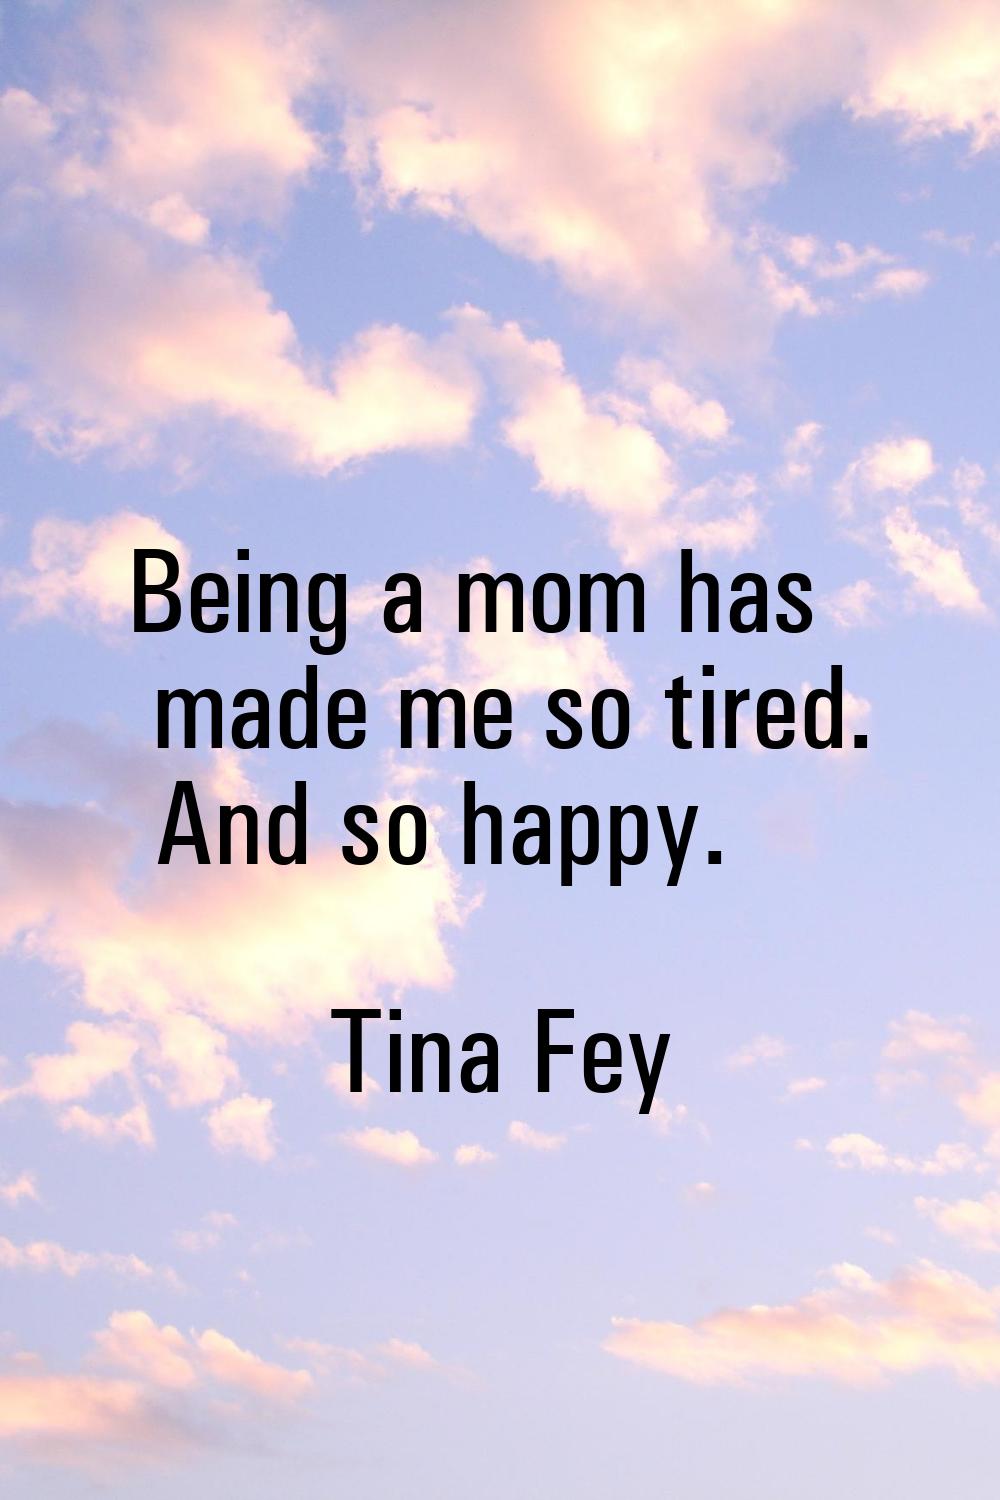 Being a mom has made me so tired. And so happy.